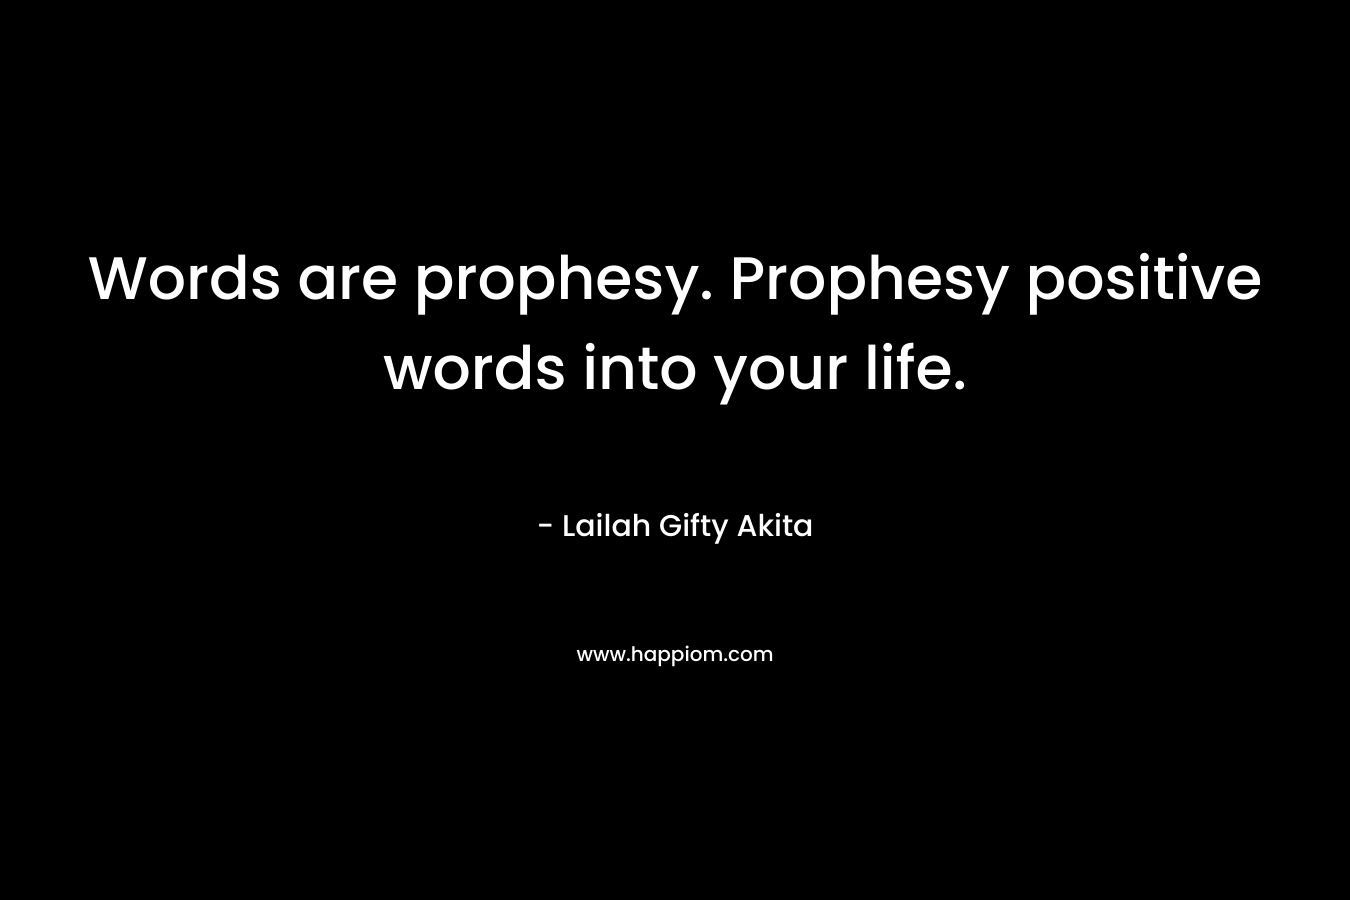 Words are prophesy. Prophesy positive words into your life. – Lailah Gifty Akita